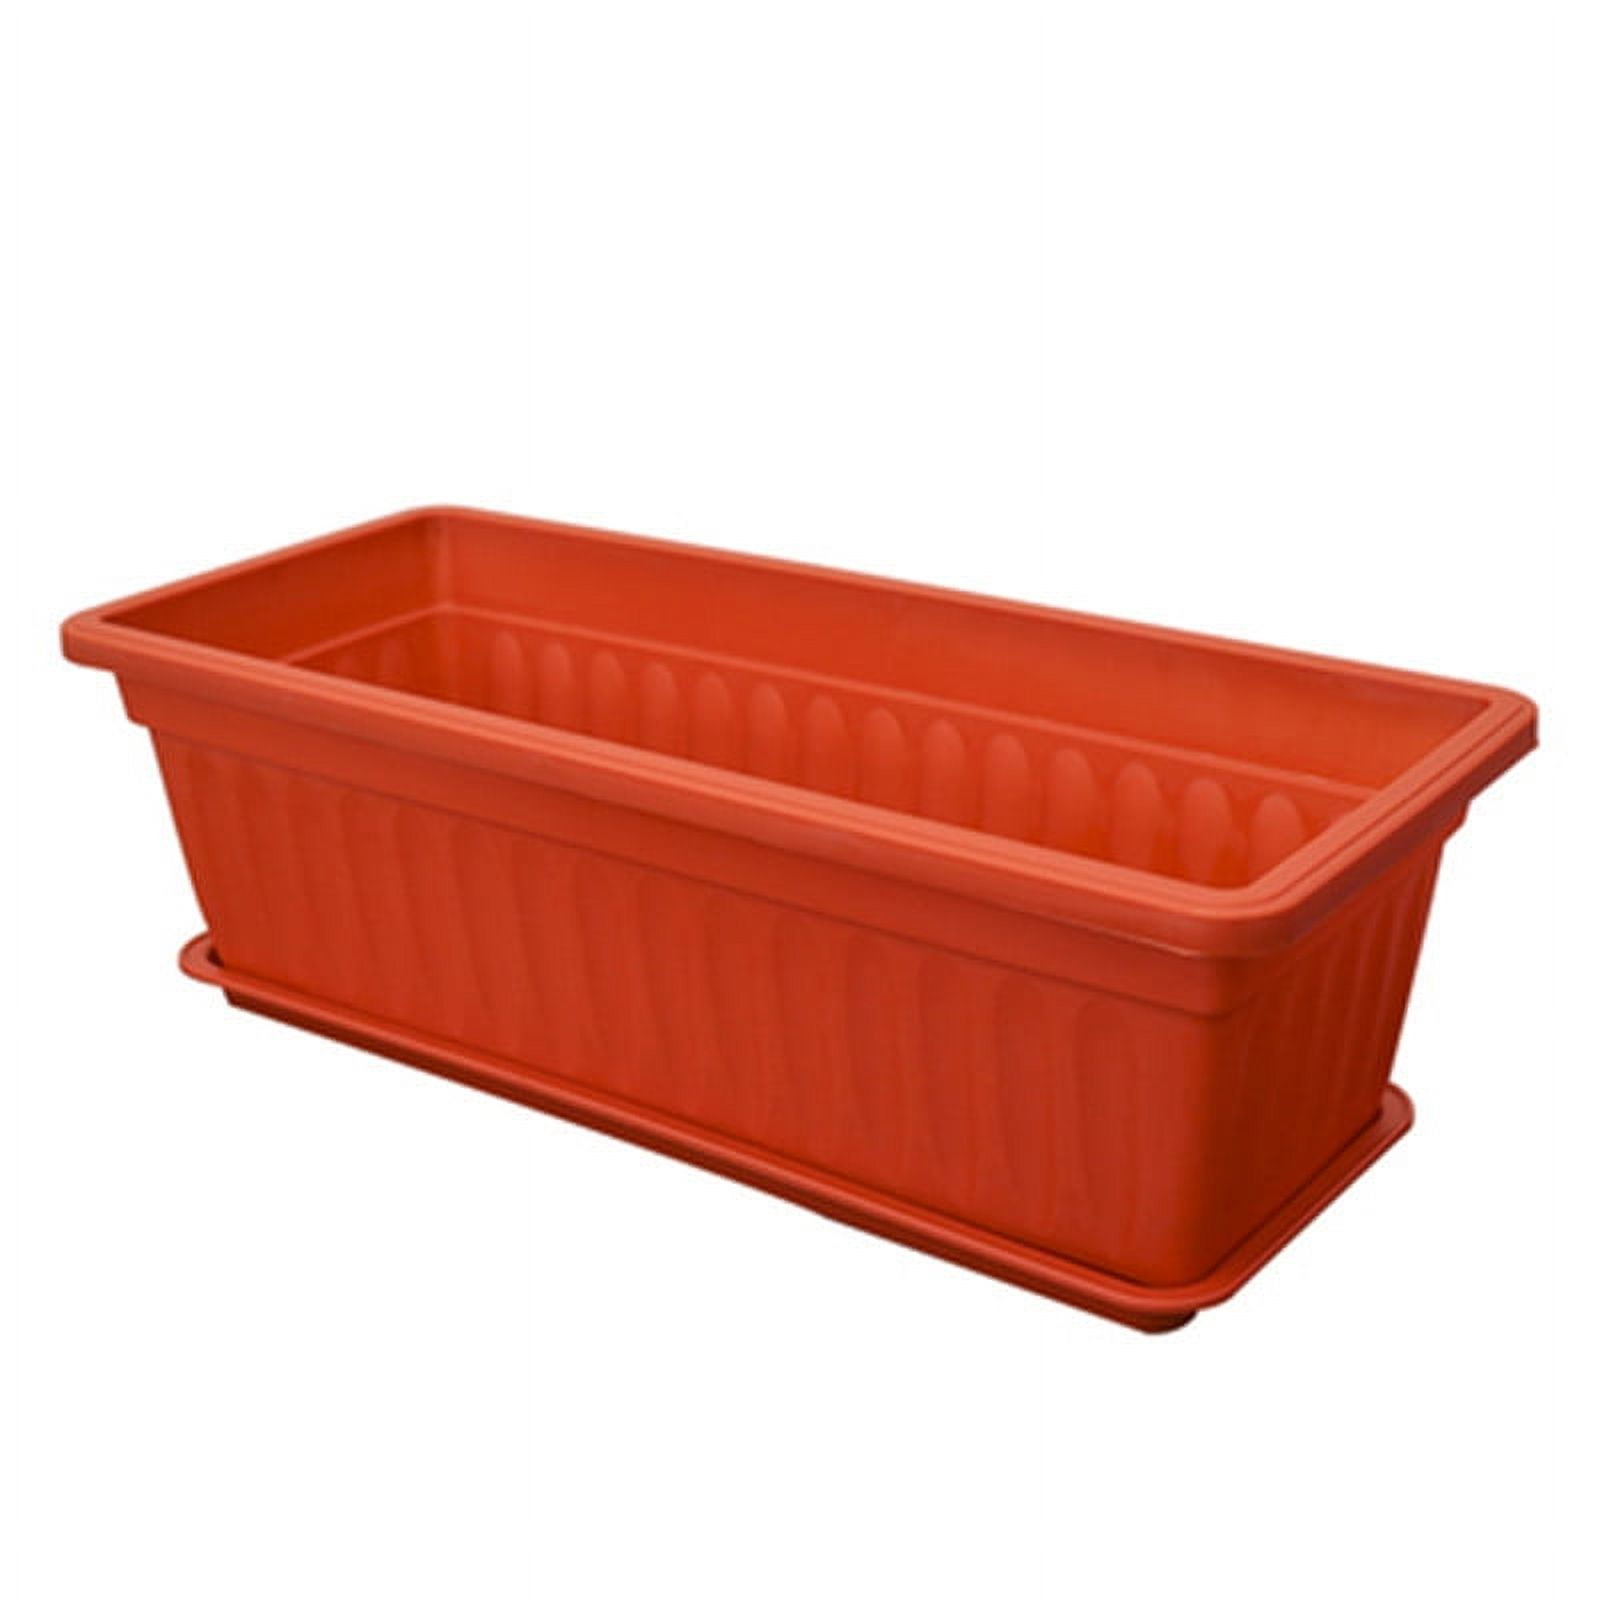 17 Inch Rectangular Plastic Thicken Planters with Trays - Window Planter Box for Outdoor and Indoor Herbs, Vegetables, Flowers and Succulent Plants (1 Pack Brick Red) - image 1 of 7